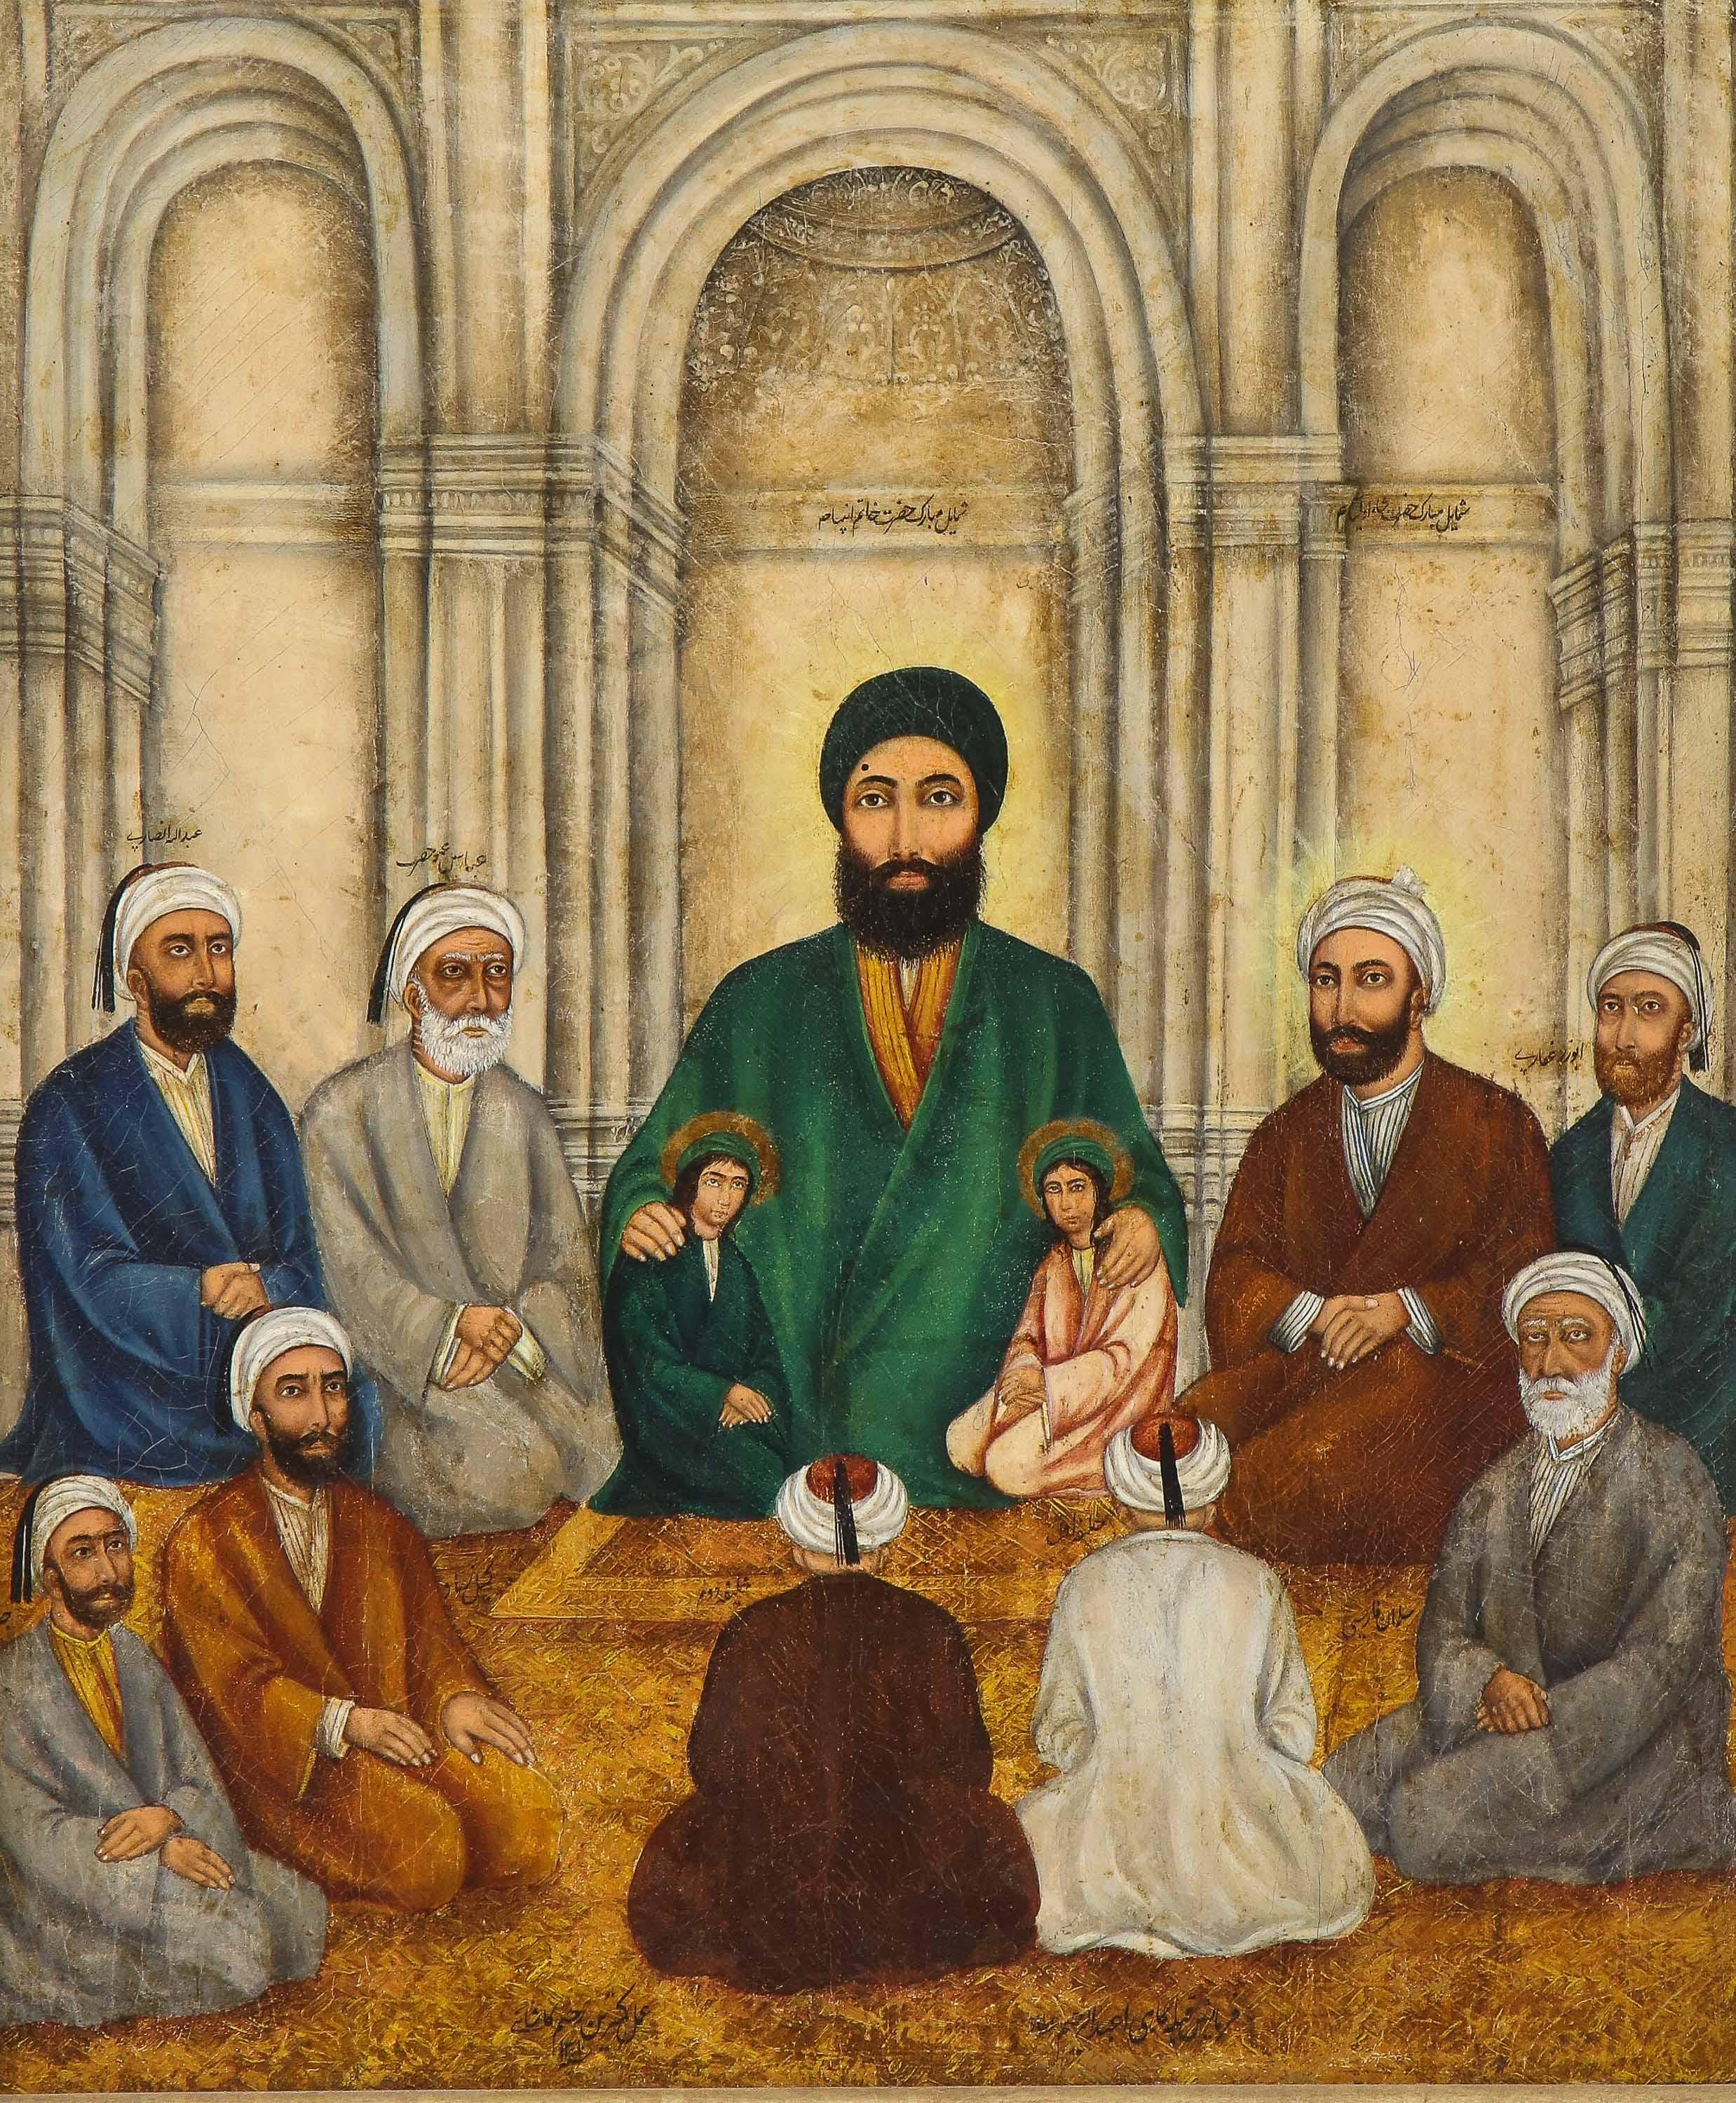 An extremely fine and rare Islamic Qajar dynasty portrait oil on canvas painting of Prophet Mohammad, signed and dated, 1883.

This rare, historic, Persian painting captures fine painted portraits of Prophet Mohammad, his son in law Ali, his two